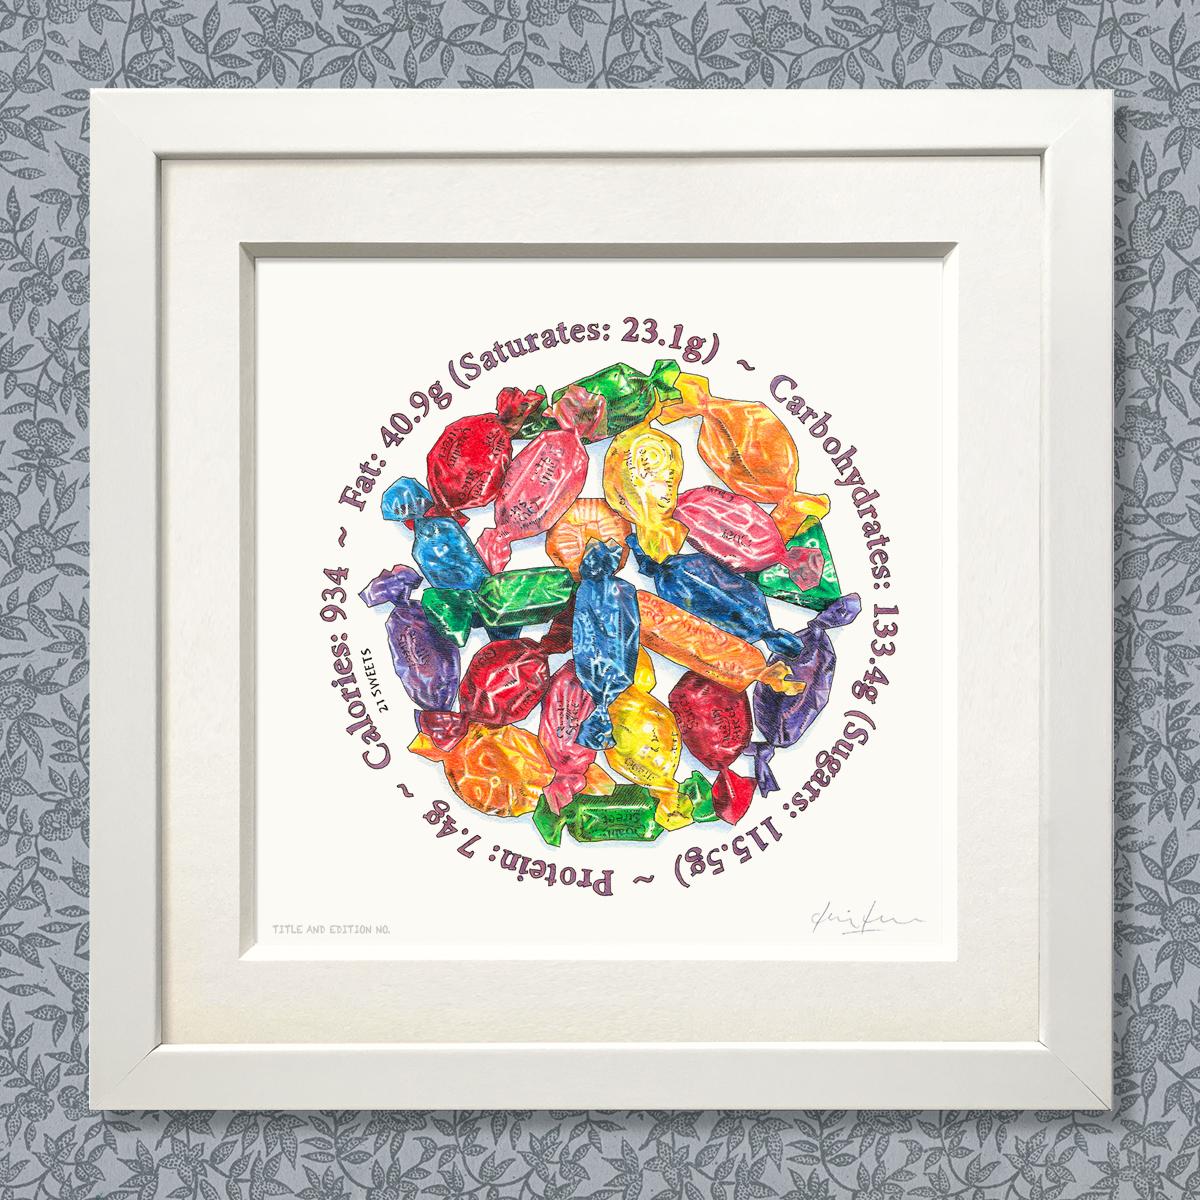 Limited edition print of coloured drawing of a pile of Quality Street chocolates, in a white frame.